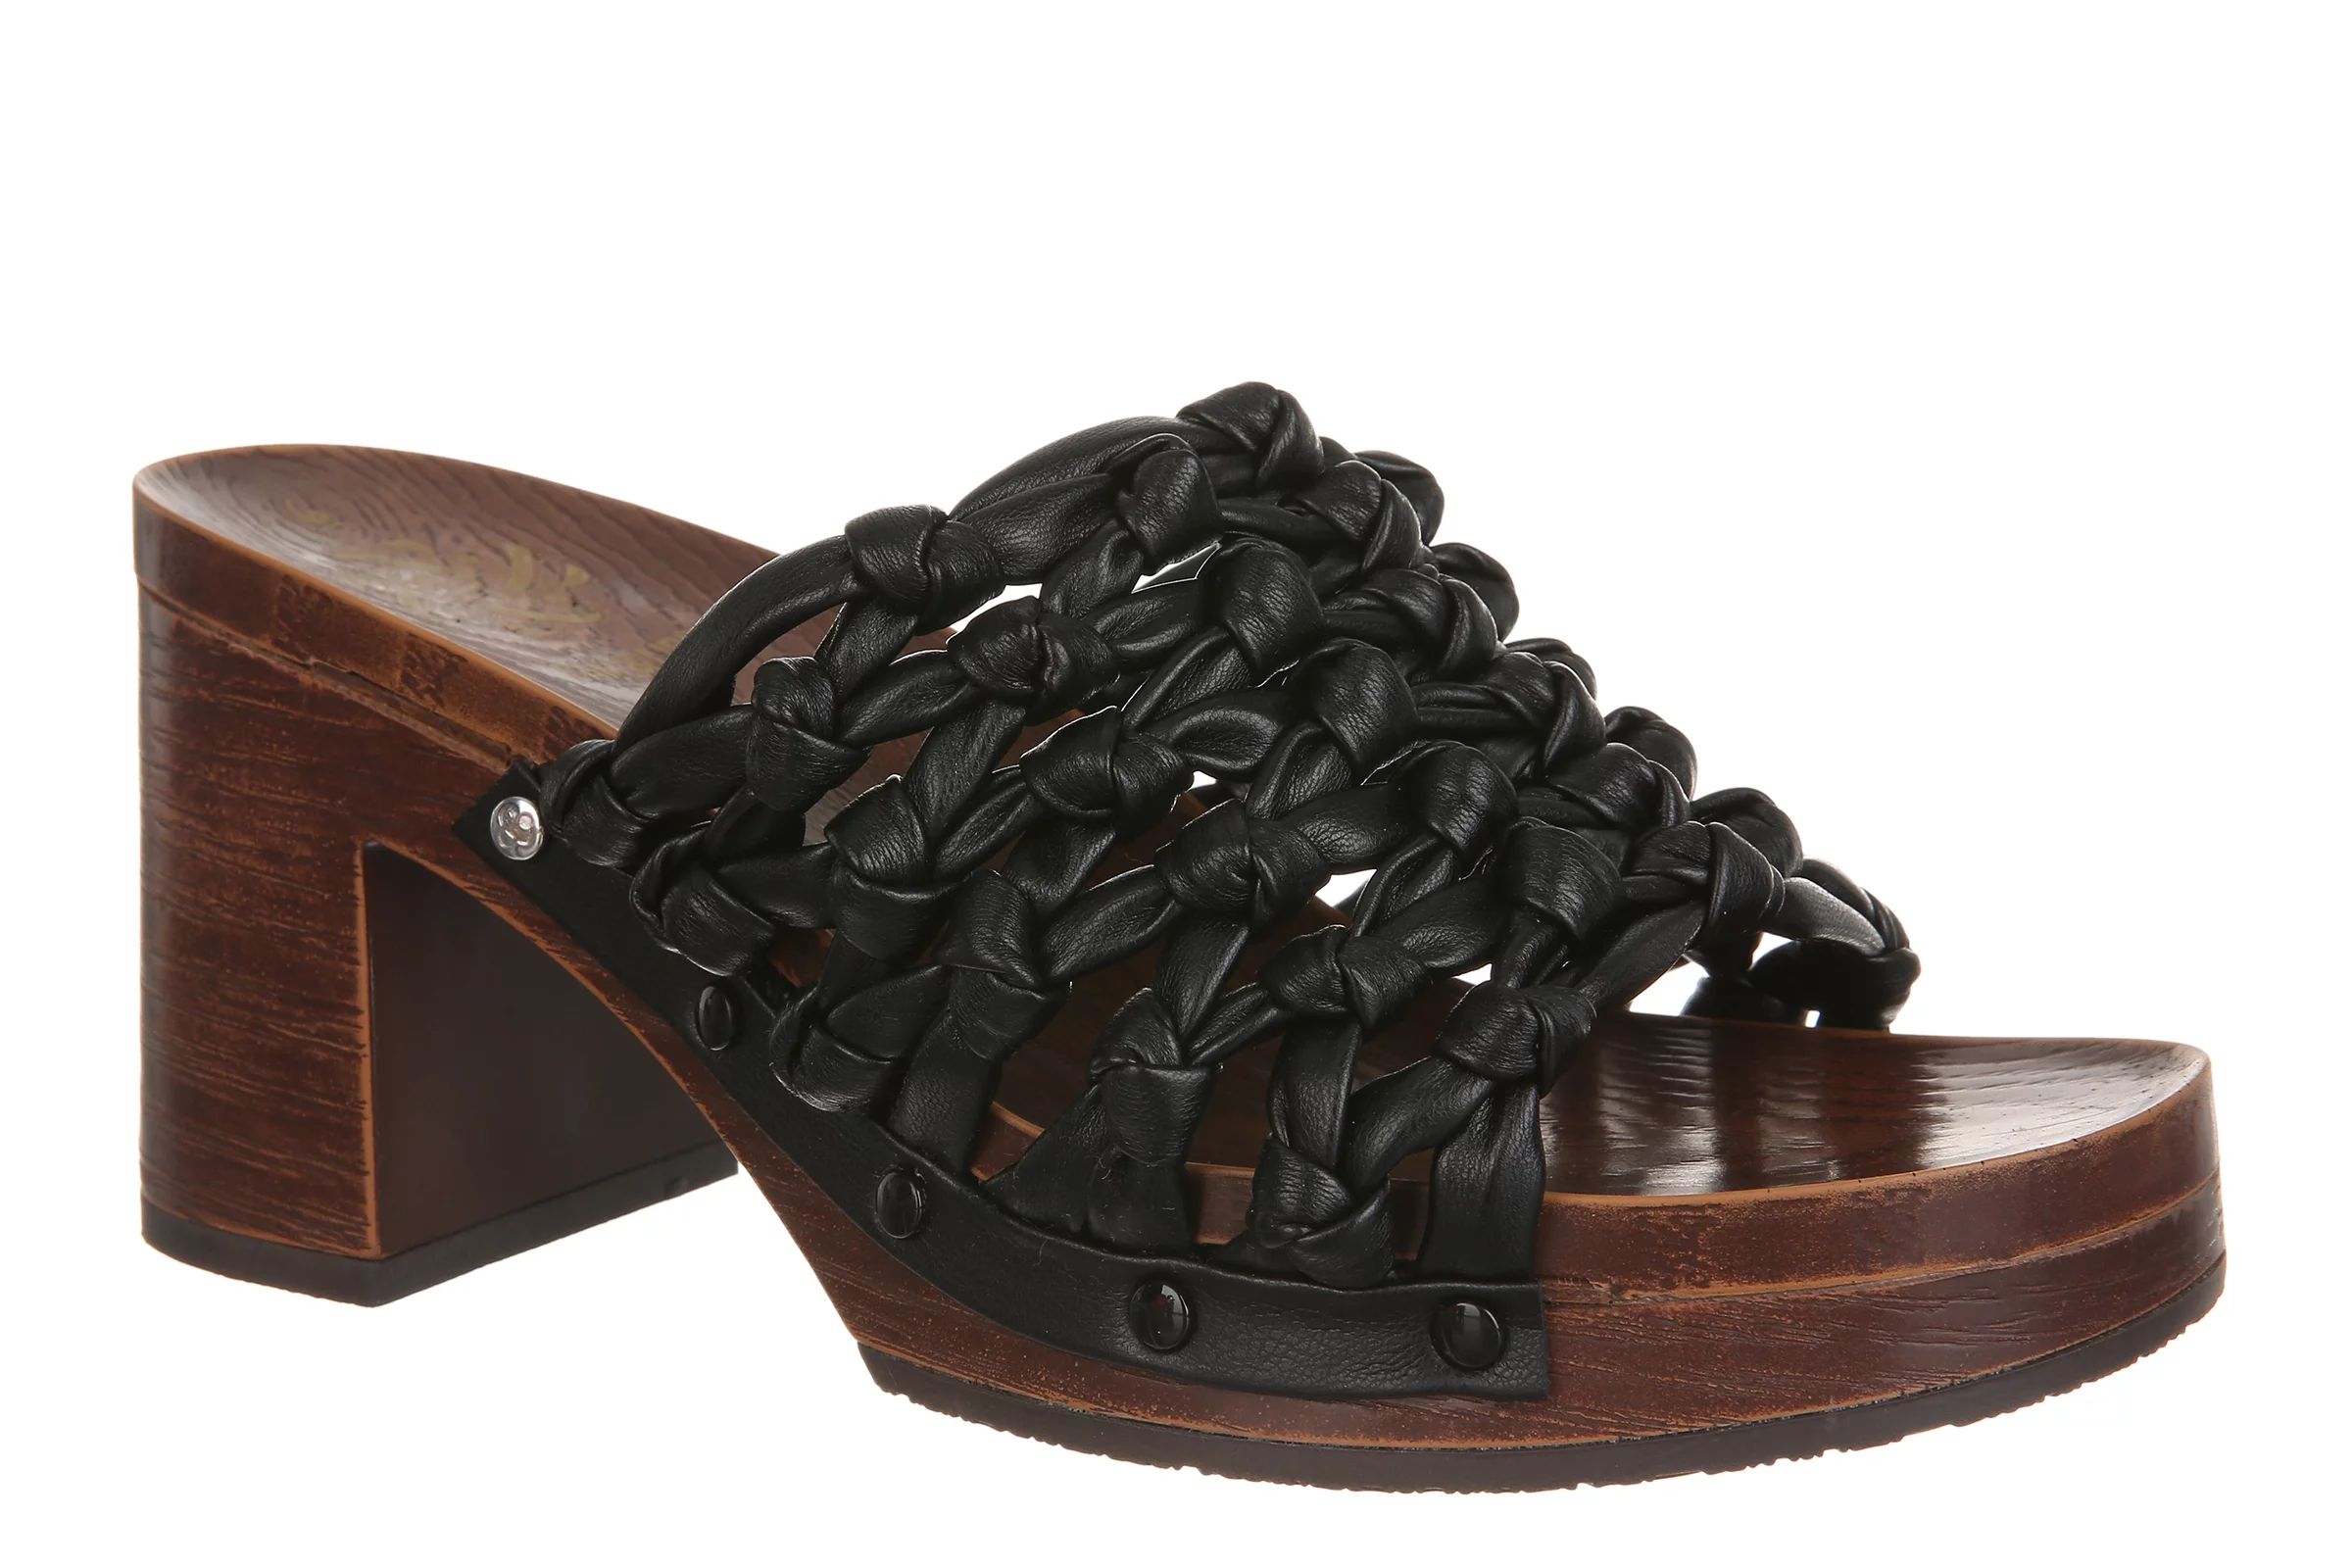 Sam & Libby Women's Carina Knotted Wooden Mule Sandal | Walmart (US)